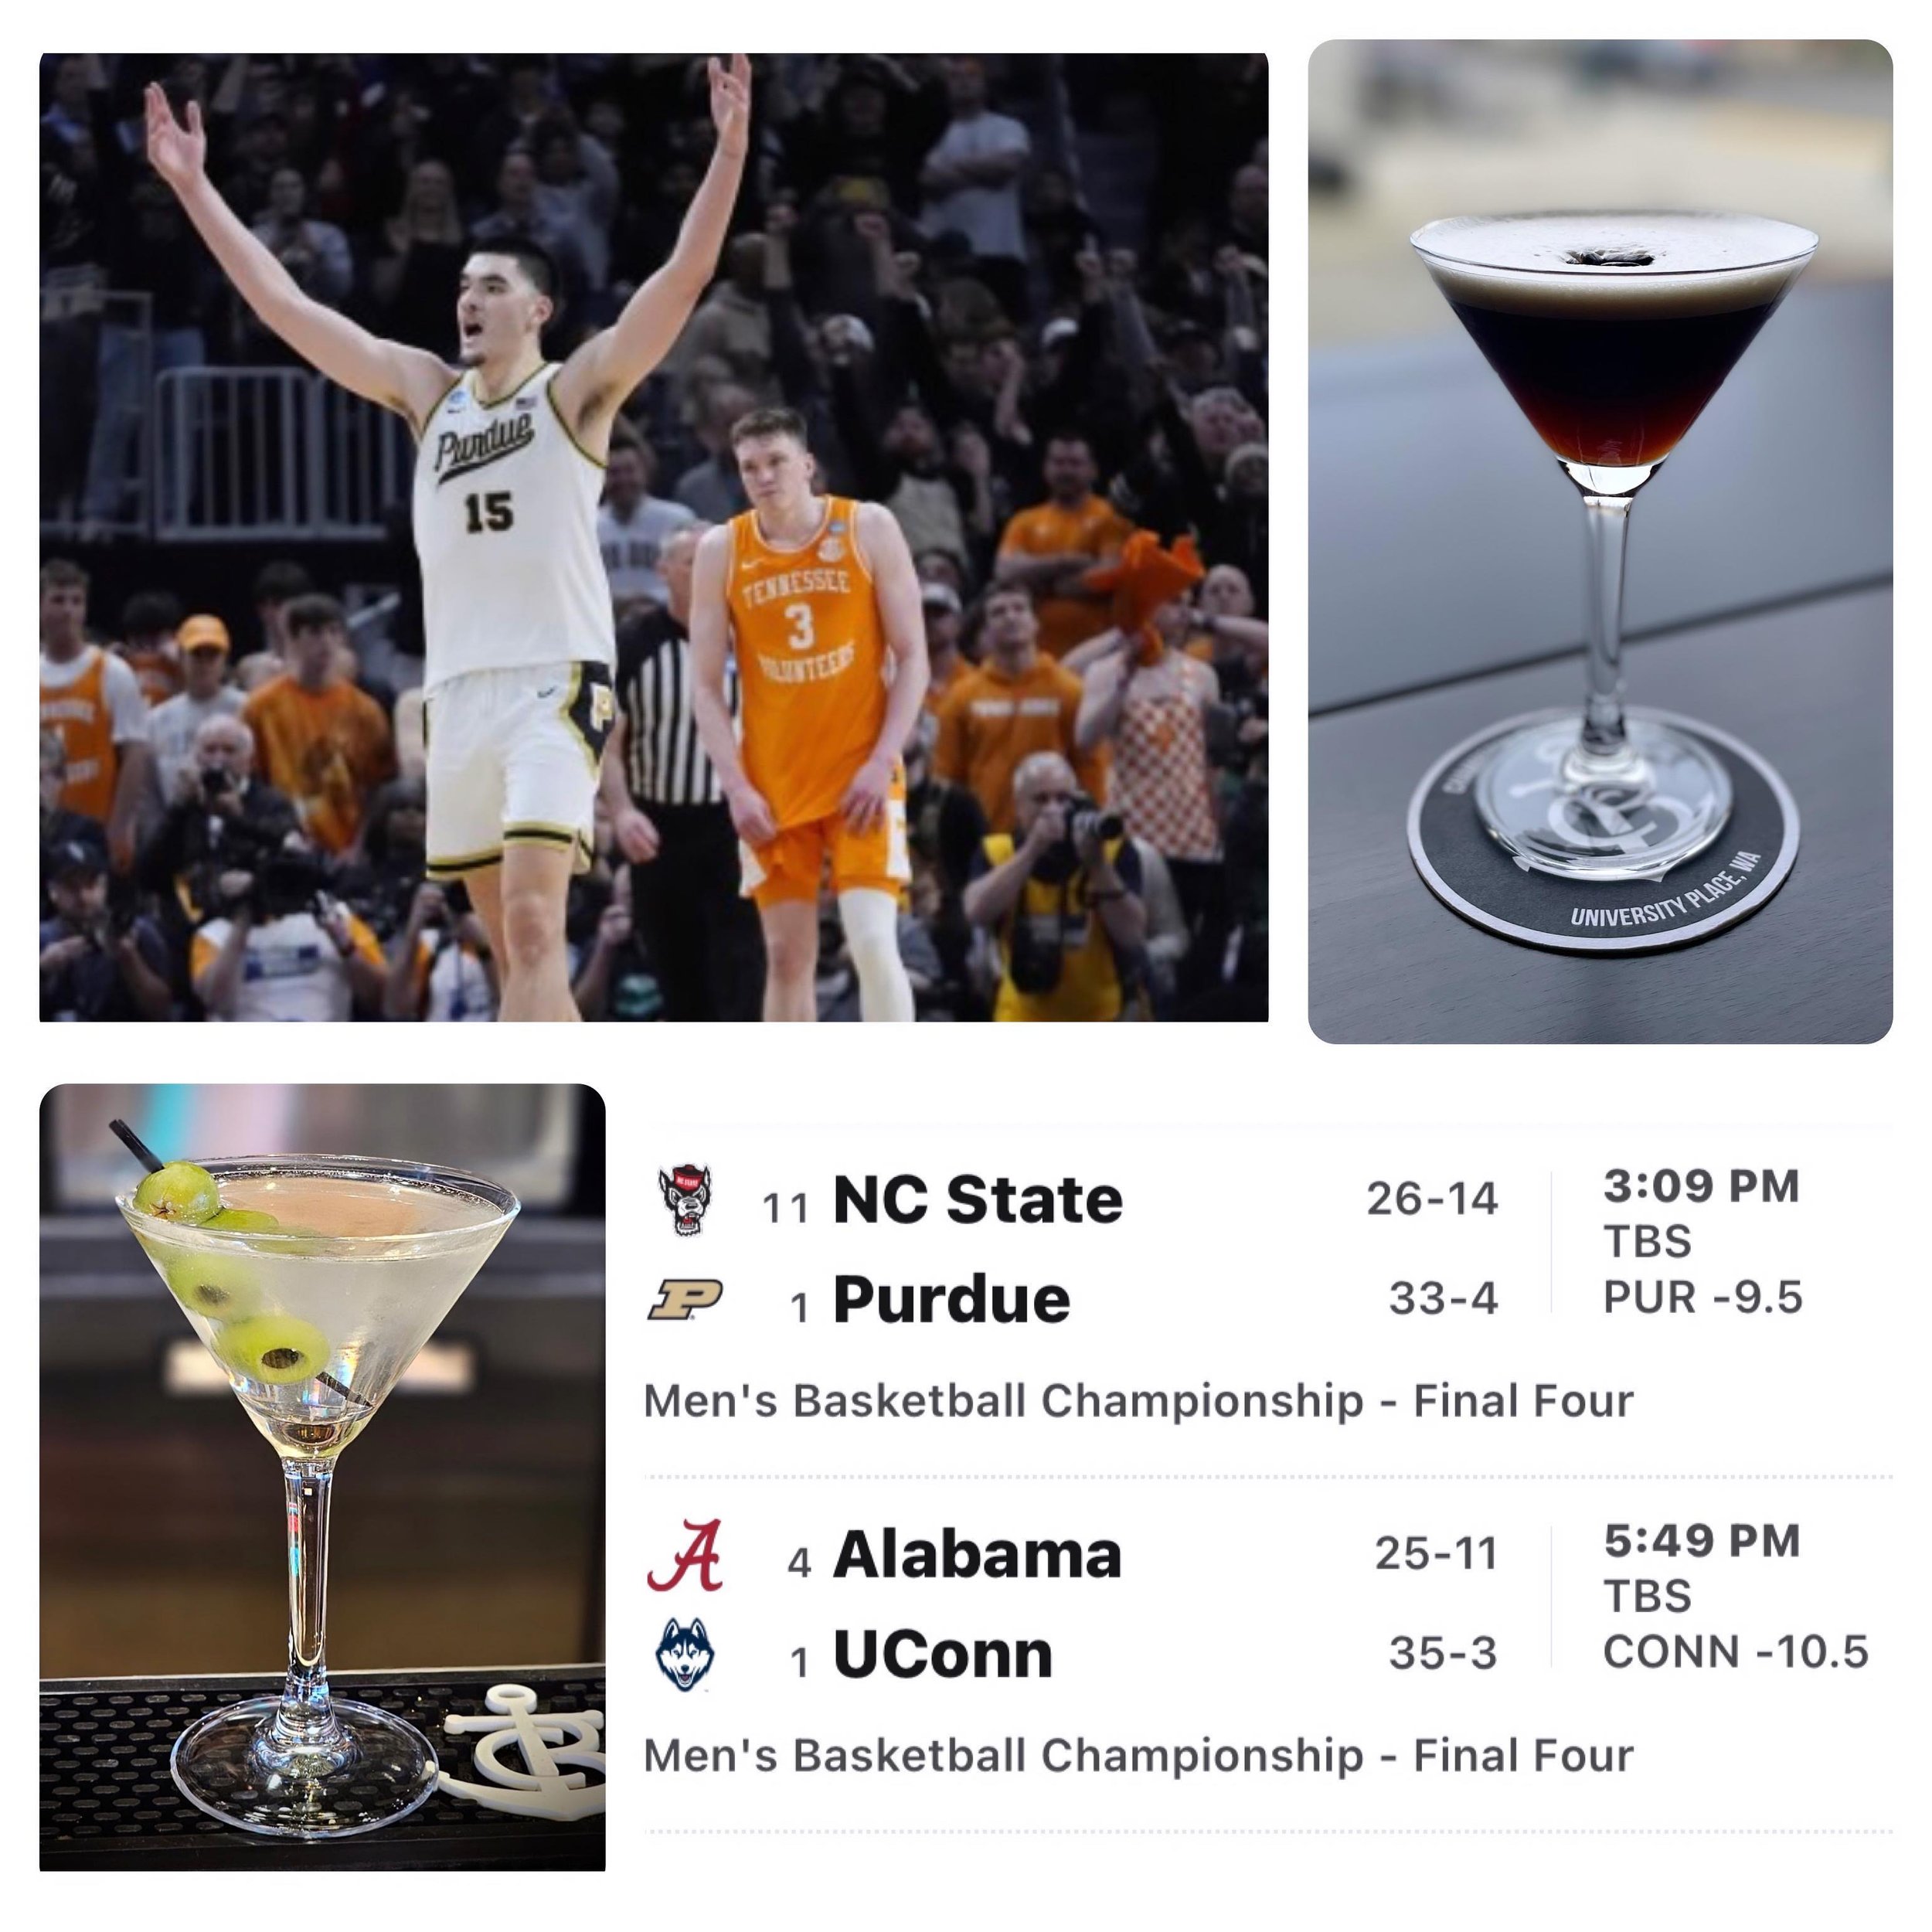 Join us for some NCAA final four basketball, craft cocktails, and tasty bites today. 🏀 🍸 🥨 🍕 We&rsquo;ll be open until 10pm. Cheers! 
&hellip;
3610 Bridgeport Way W
University Place, WA 98466
&hellip;
#CraftCocktails #MarchMadness #Vodka #Gin #Bo